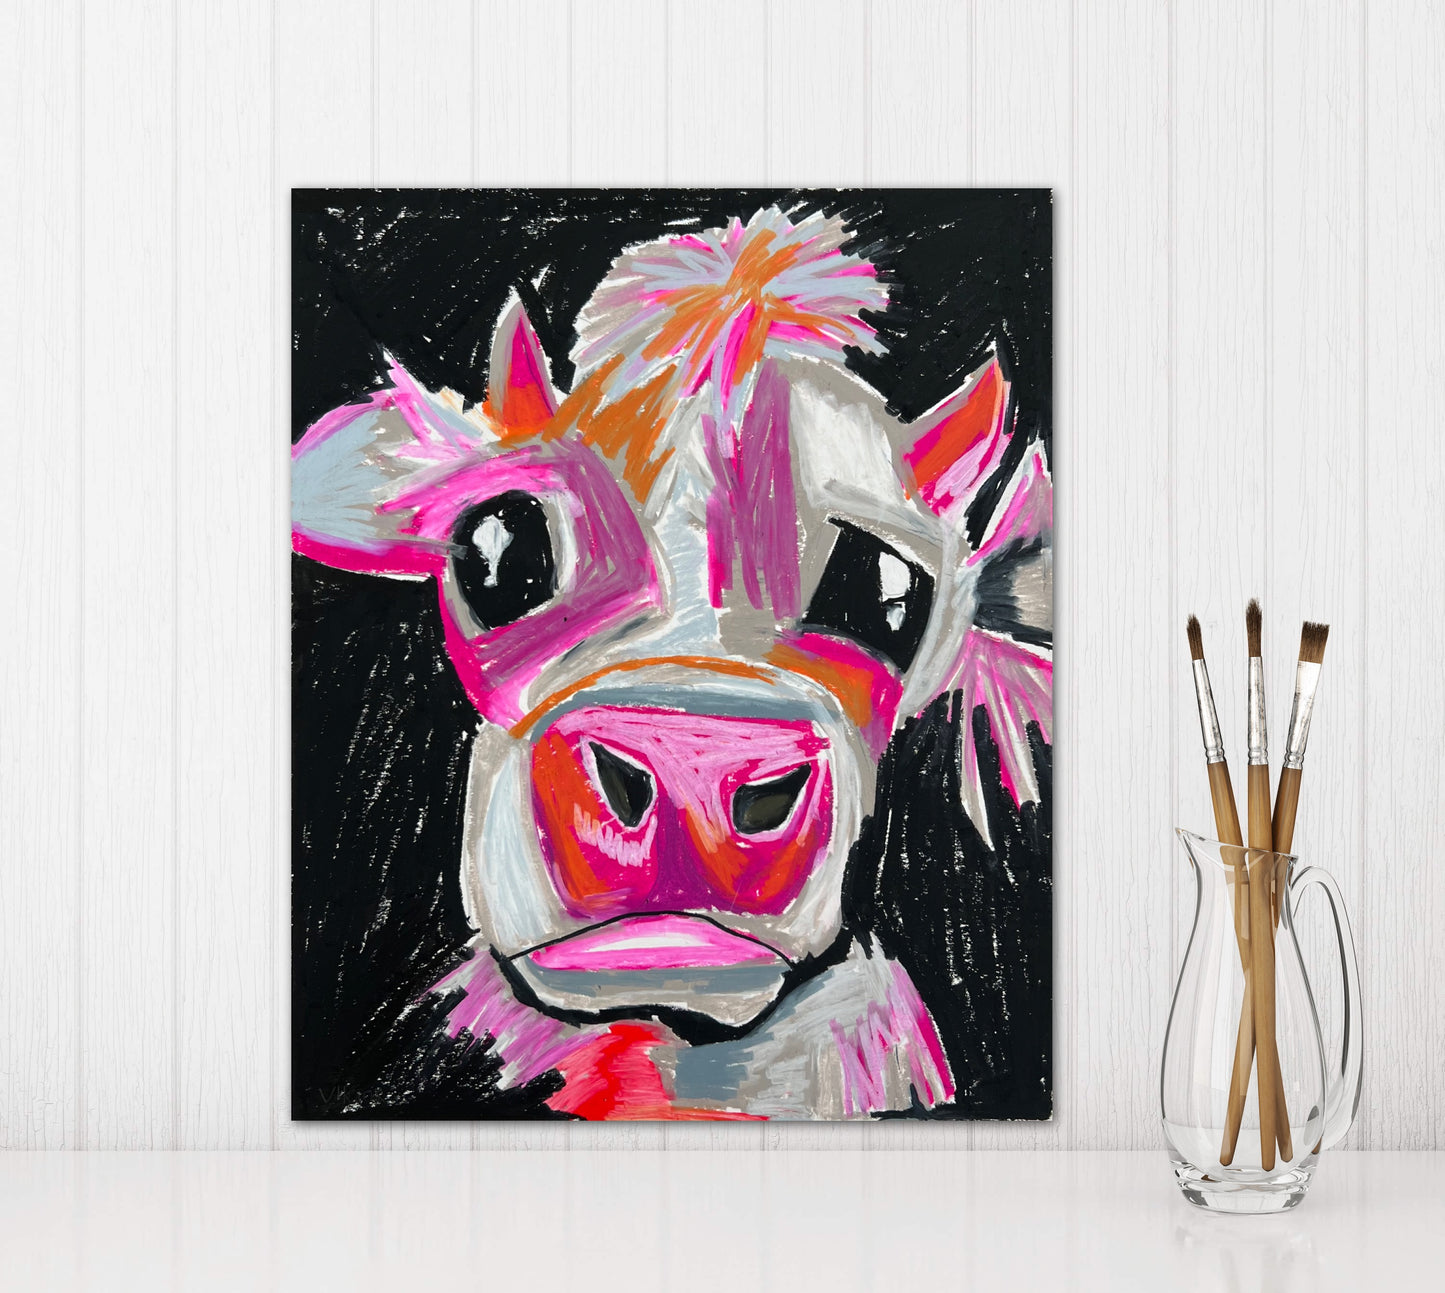 Cow Barbie - fine prints and canvas prints in more sizes